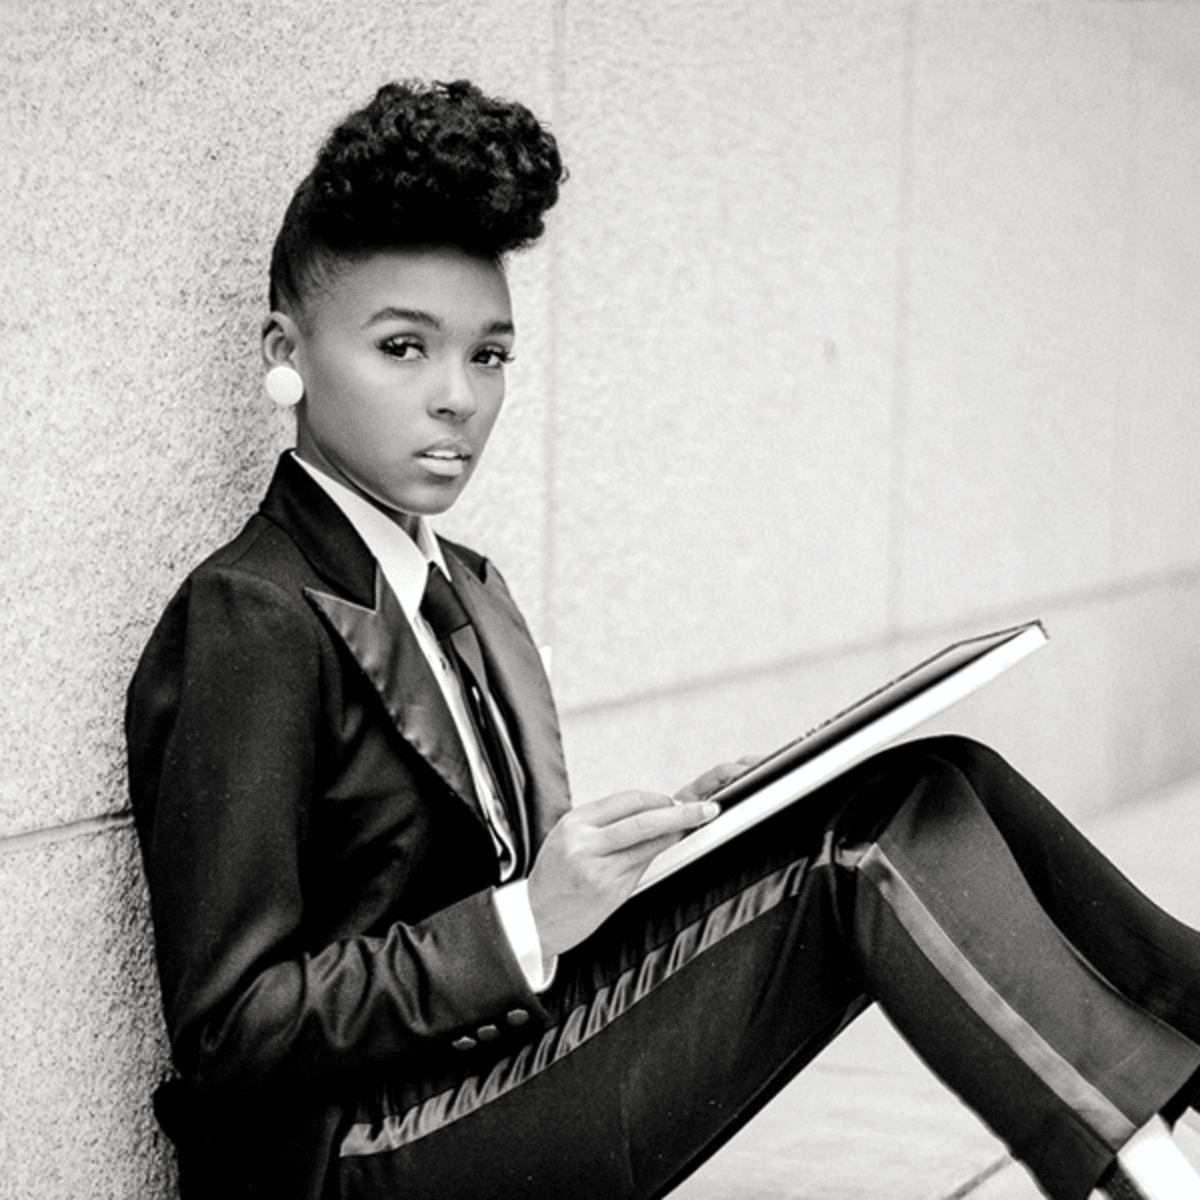 What Janelle Monáes Remark About Withholding Sex Gets Right